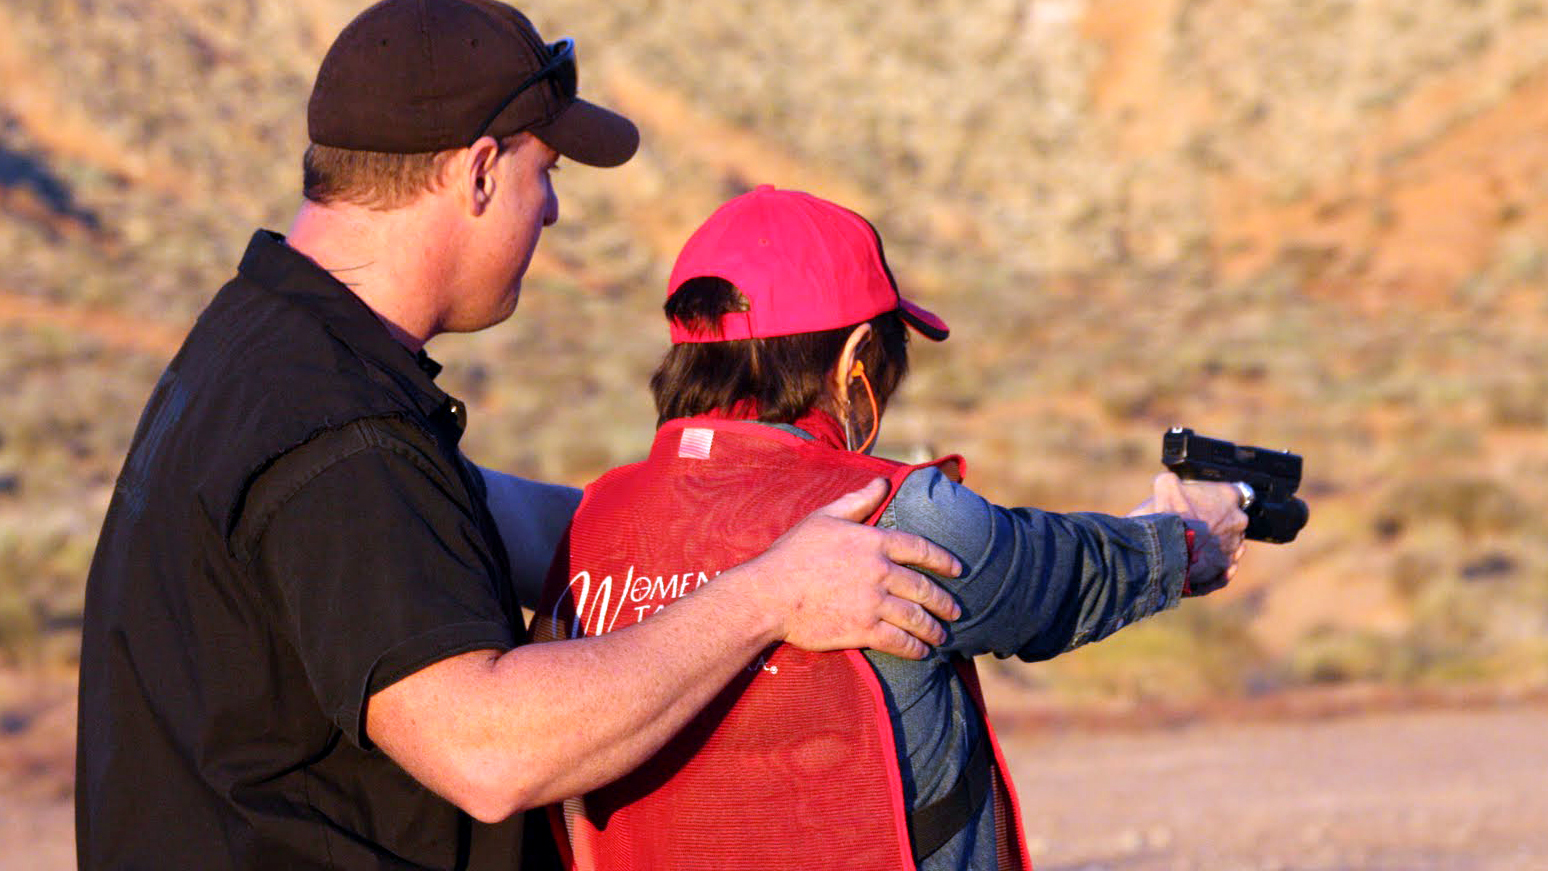 Nra Blog The Rules Of Nra Gun Safety 4711